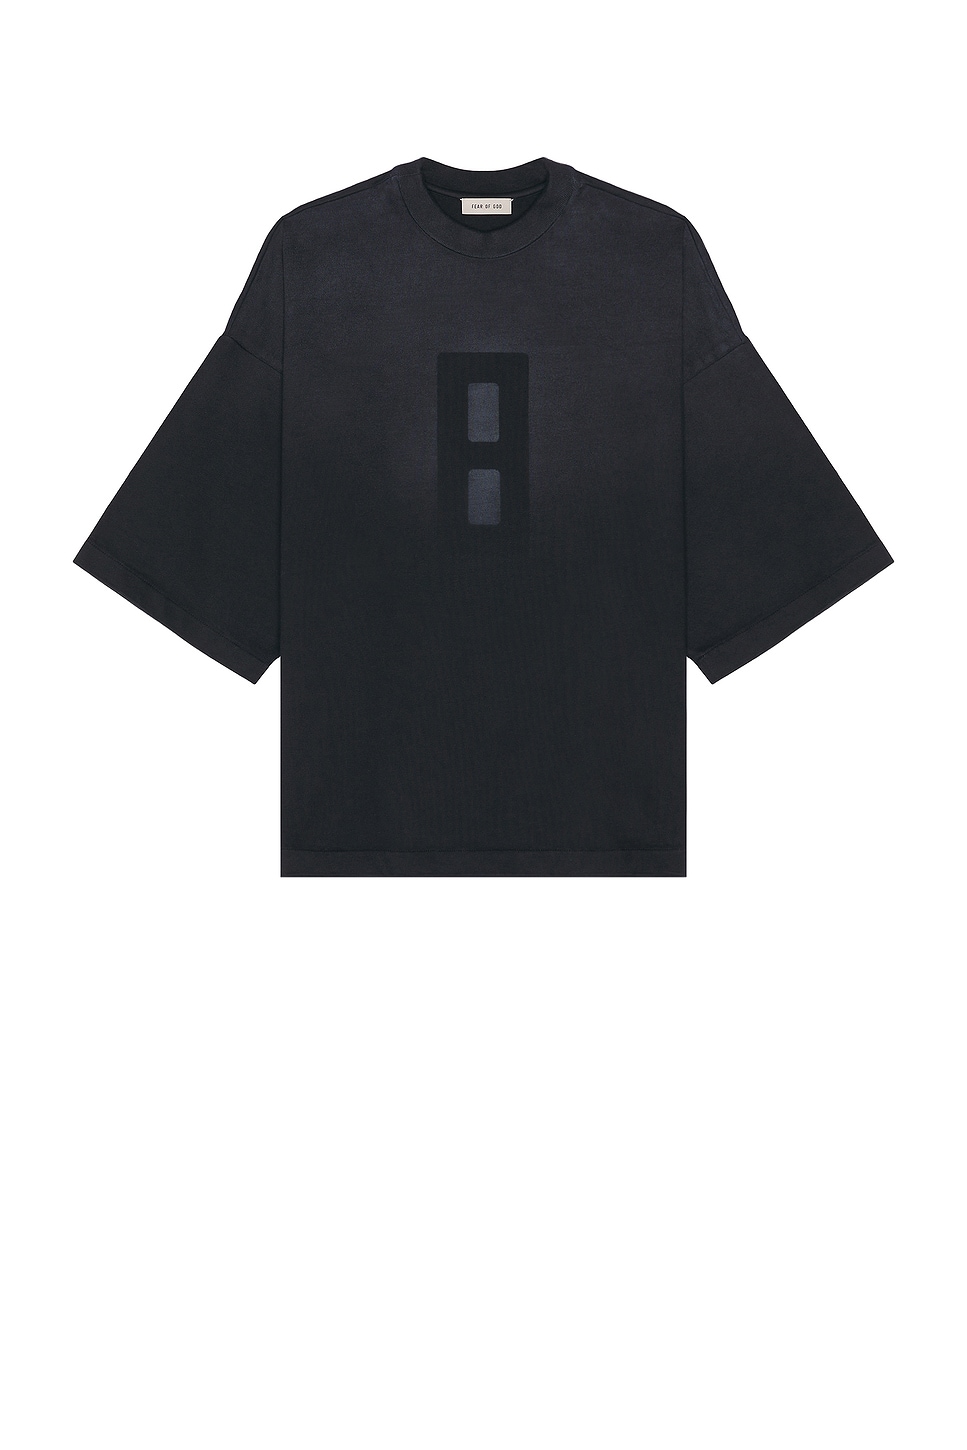 Image 1 of Fear of God Airbrush 8 Ss Tee in Black